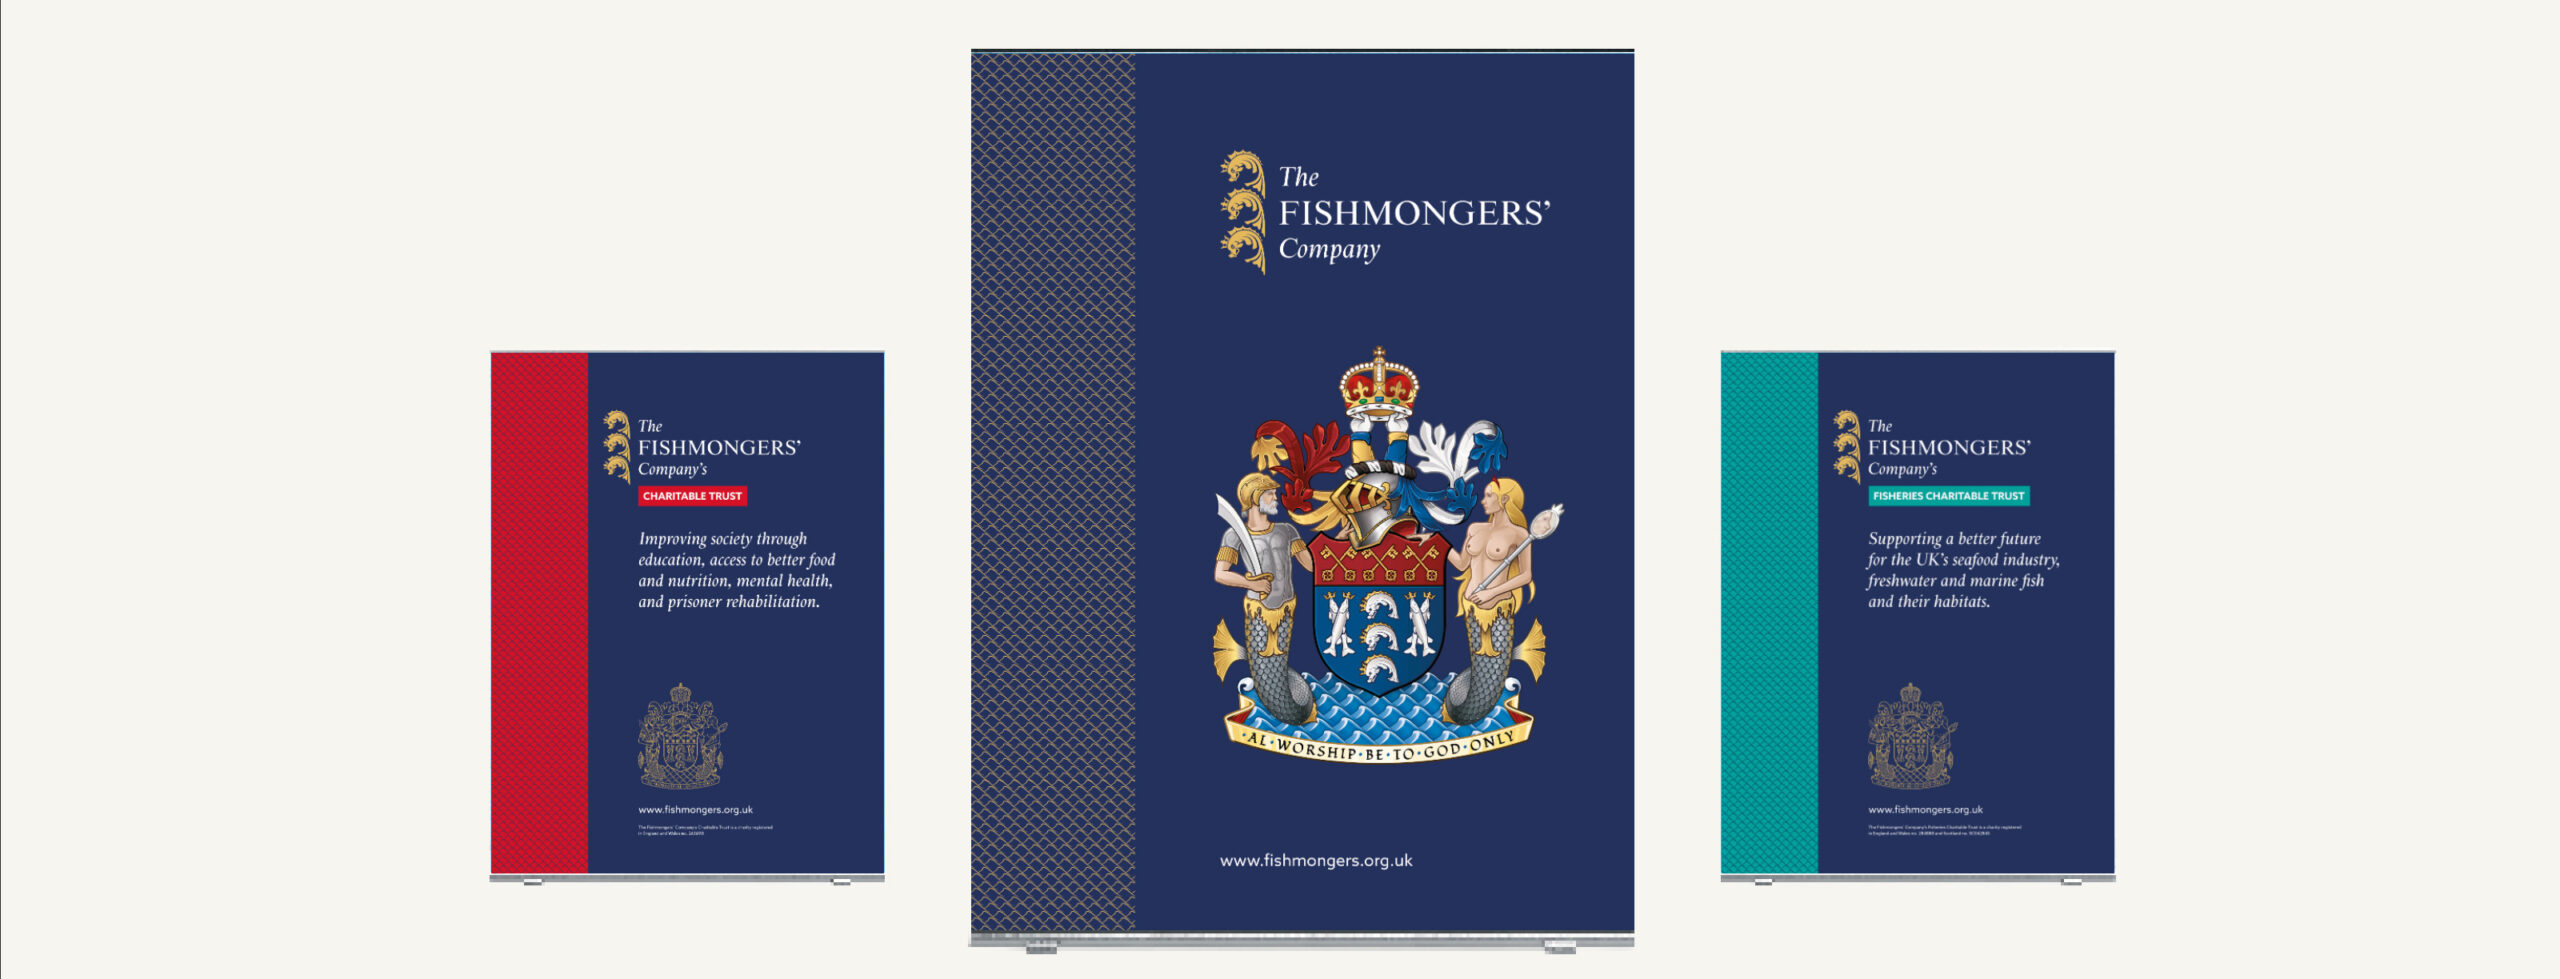 Fishmongers Company Roller Banners